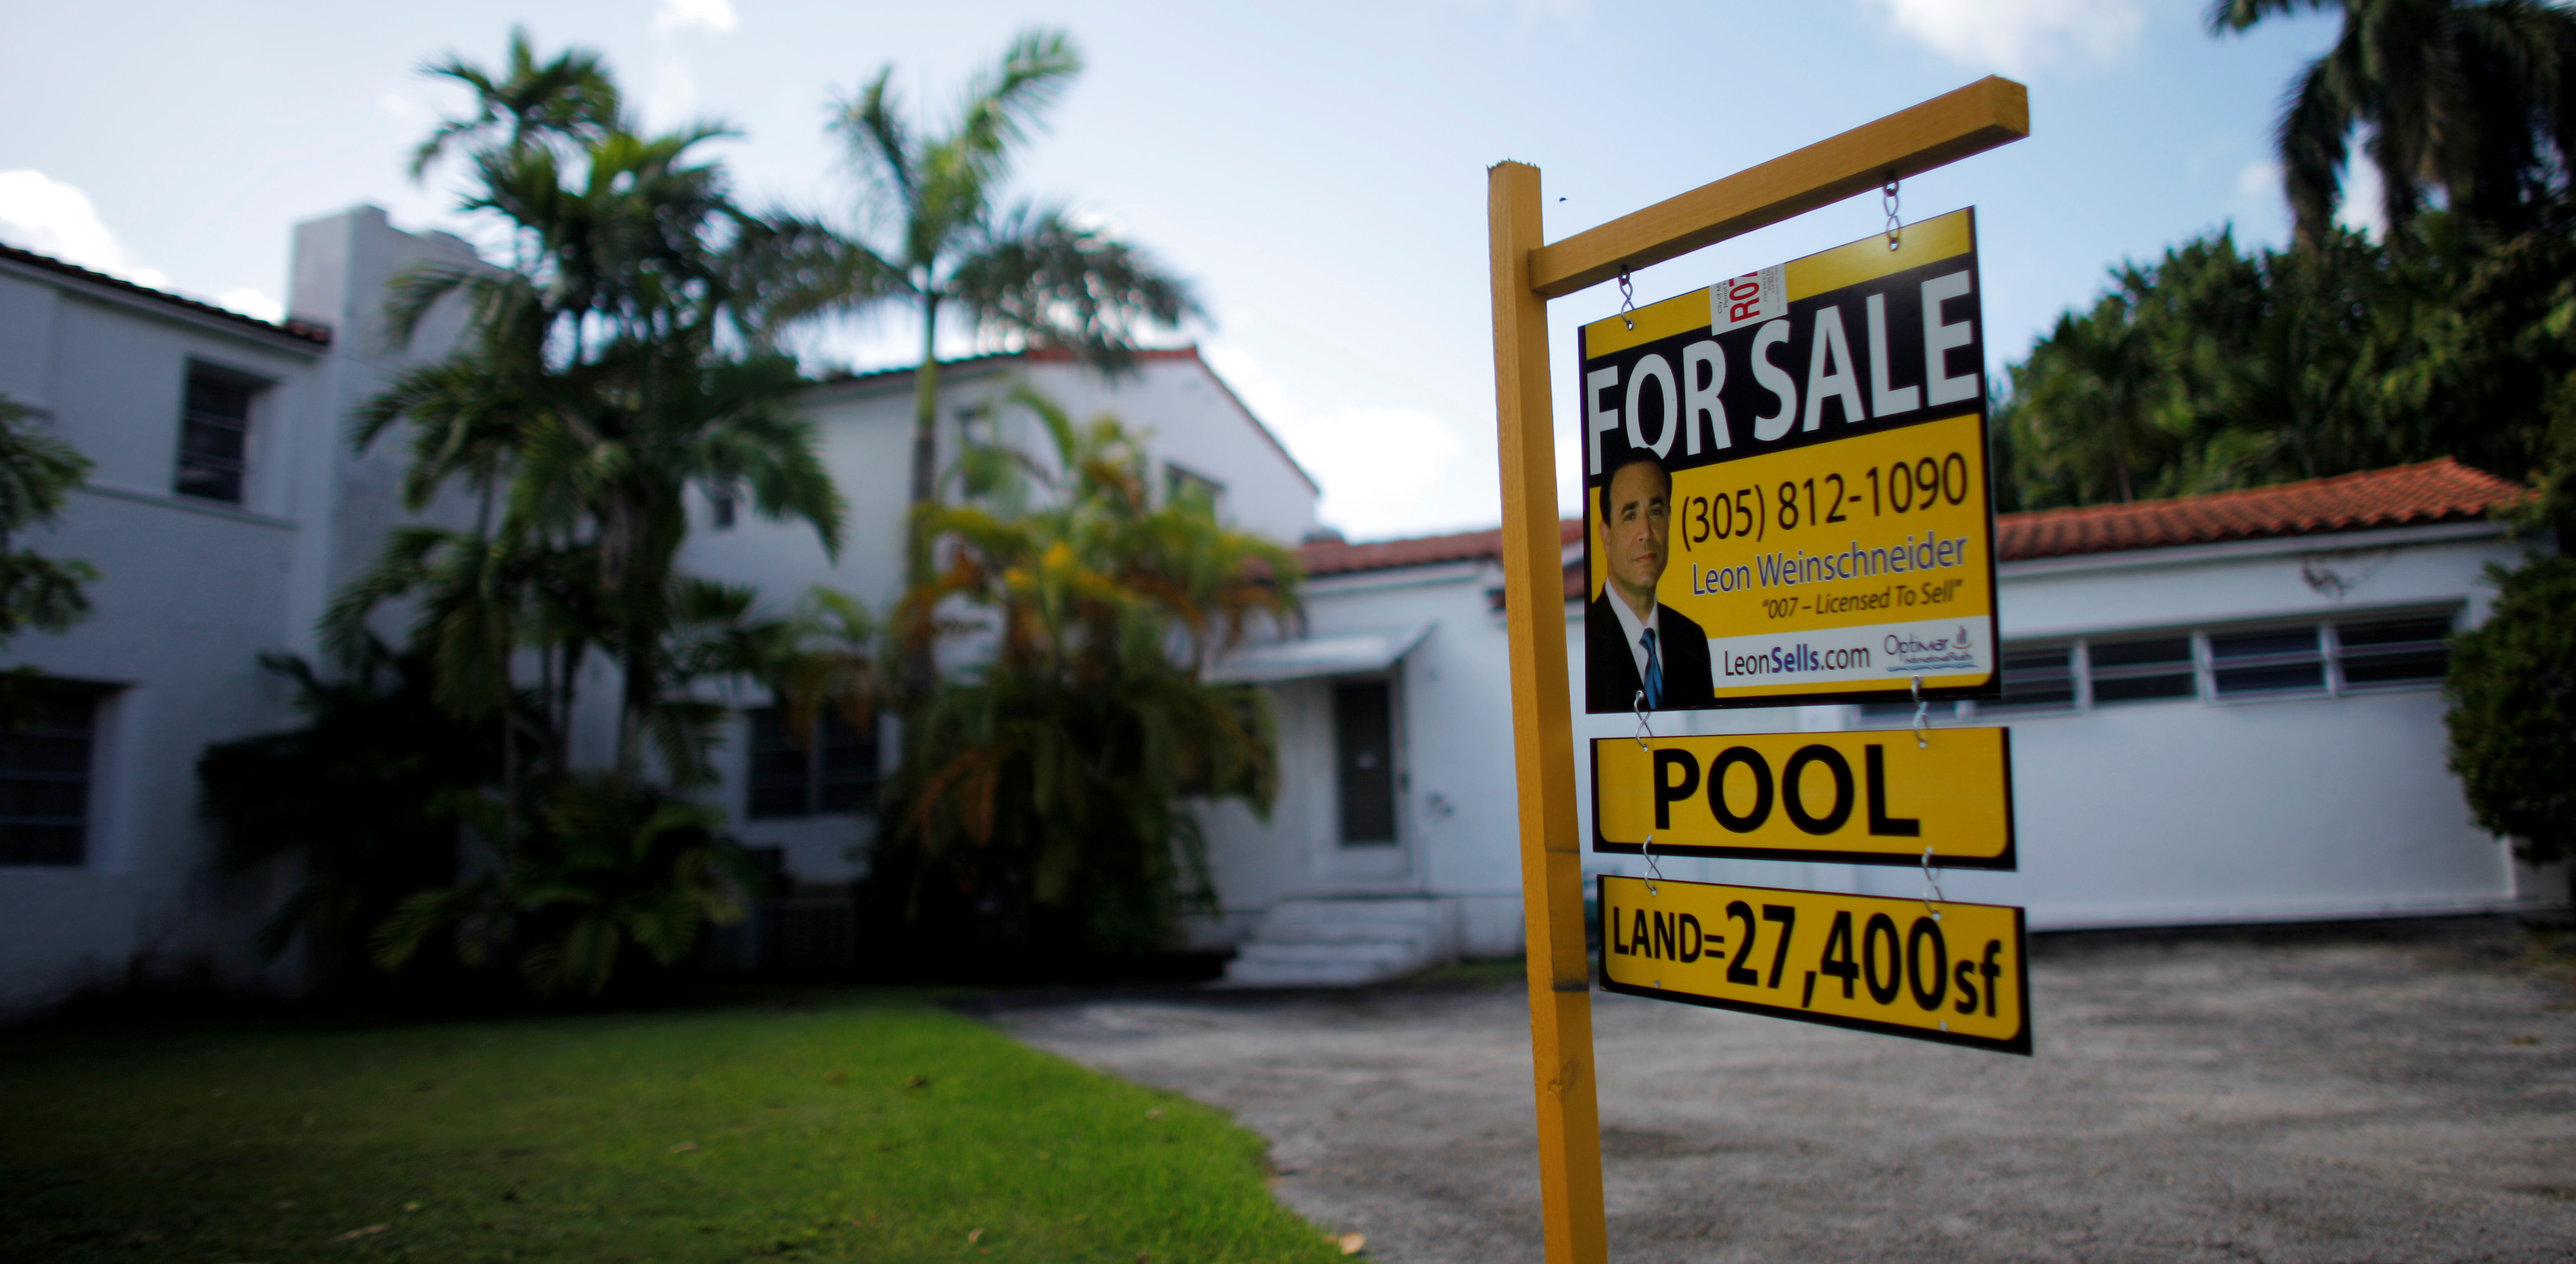 A for sale sign sits outside a house in Miami Beach October 22, 2009. REUTERS/Carlos Barria